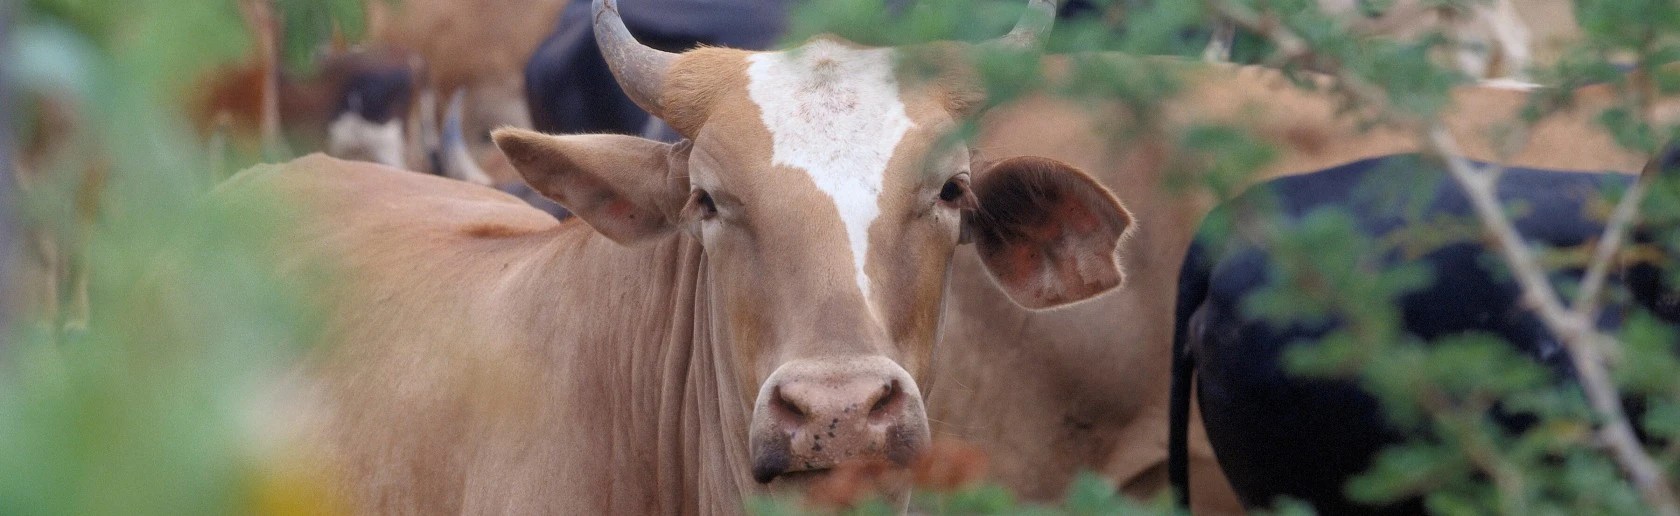 Focus On foot and mouth disease vaccine strains banner image - A cow staring directly through a gap in branches at the camera